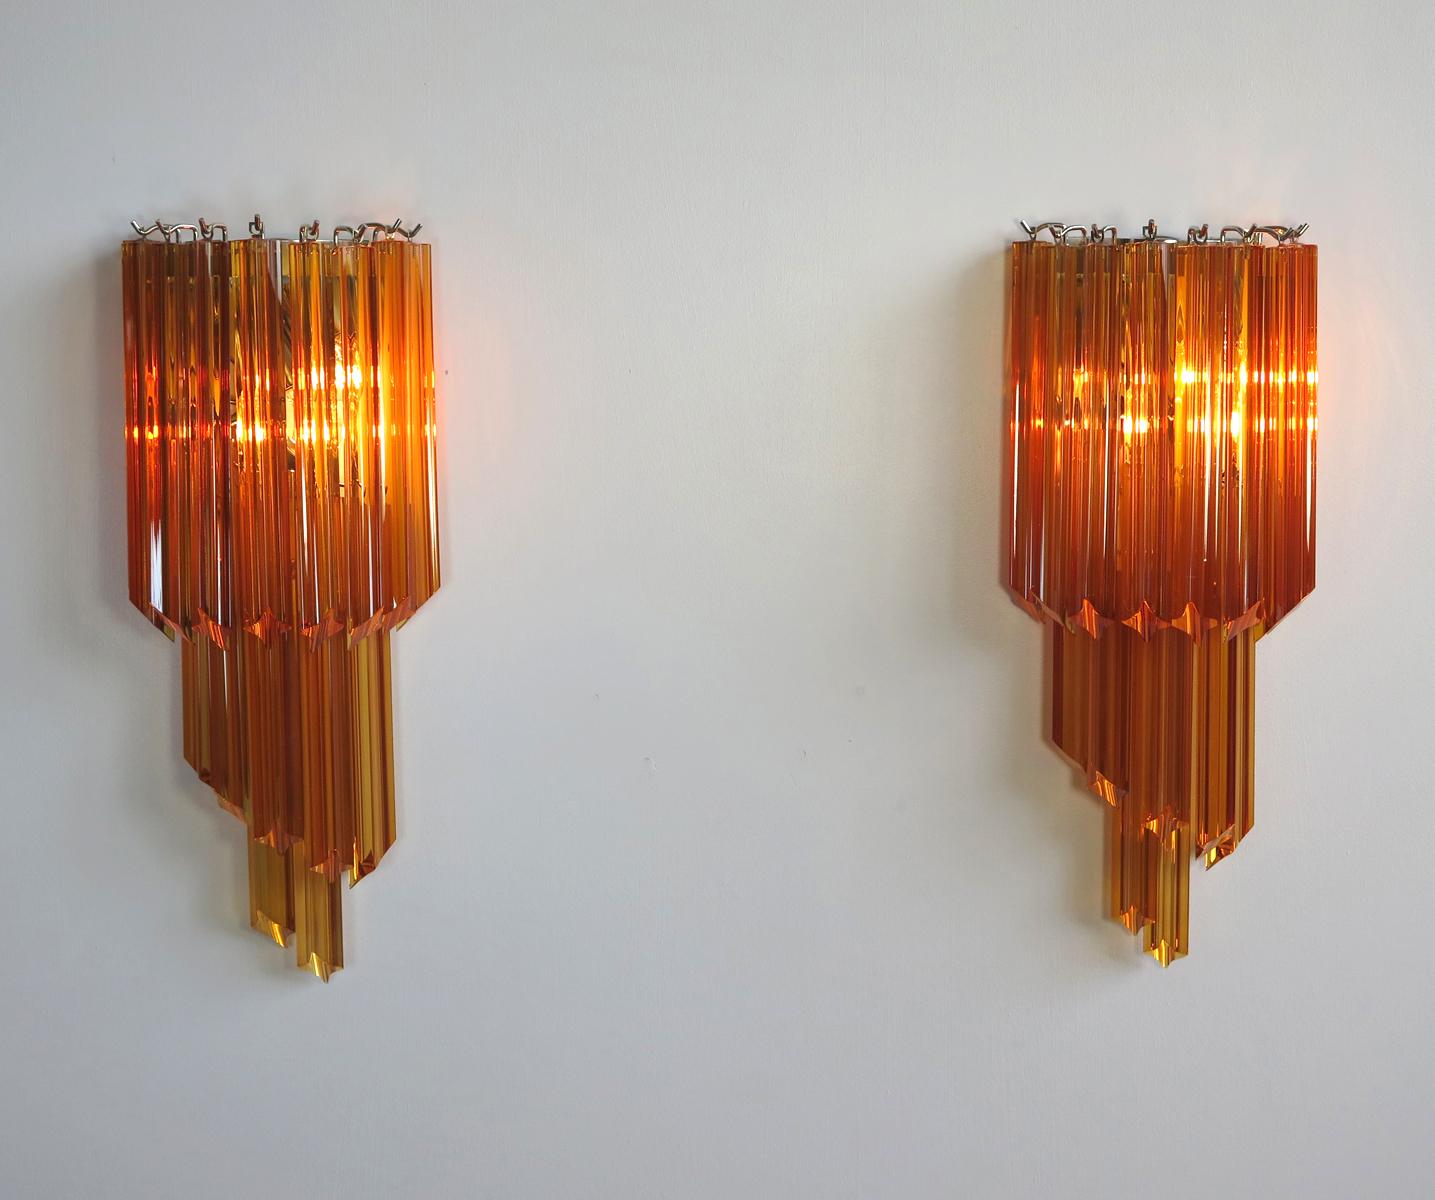 Fantastic pair of vintage Murano wall sconce made by 16 Murano crystal prism (quadriedri) for each applique in a chrome metal frame. The shape of this sconce is spiral.
Period: late 20th century
Dimensions: 21.65 inches height (55 cm); 9.85 inches